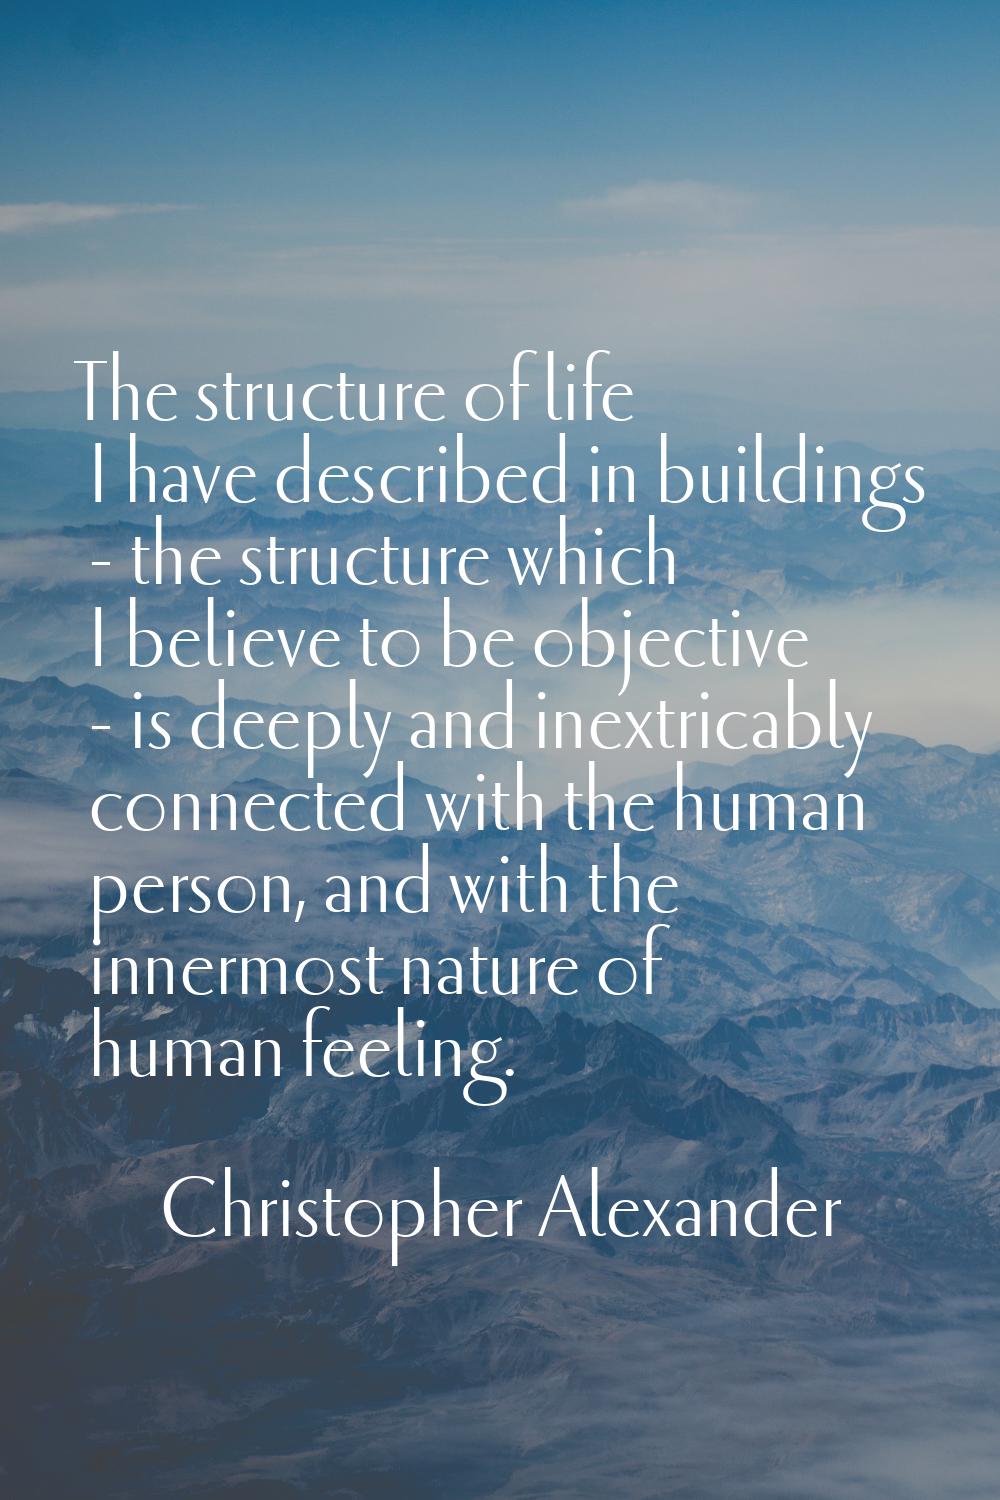 The structure of life I have described in buildings - the structure which I believe to be objective